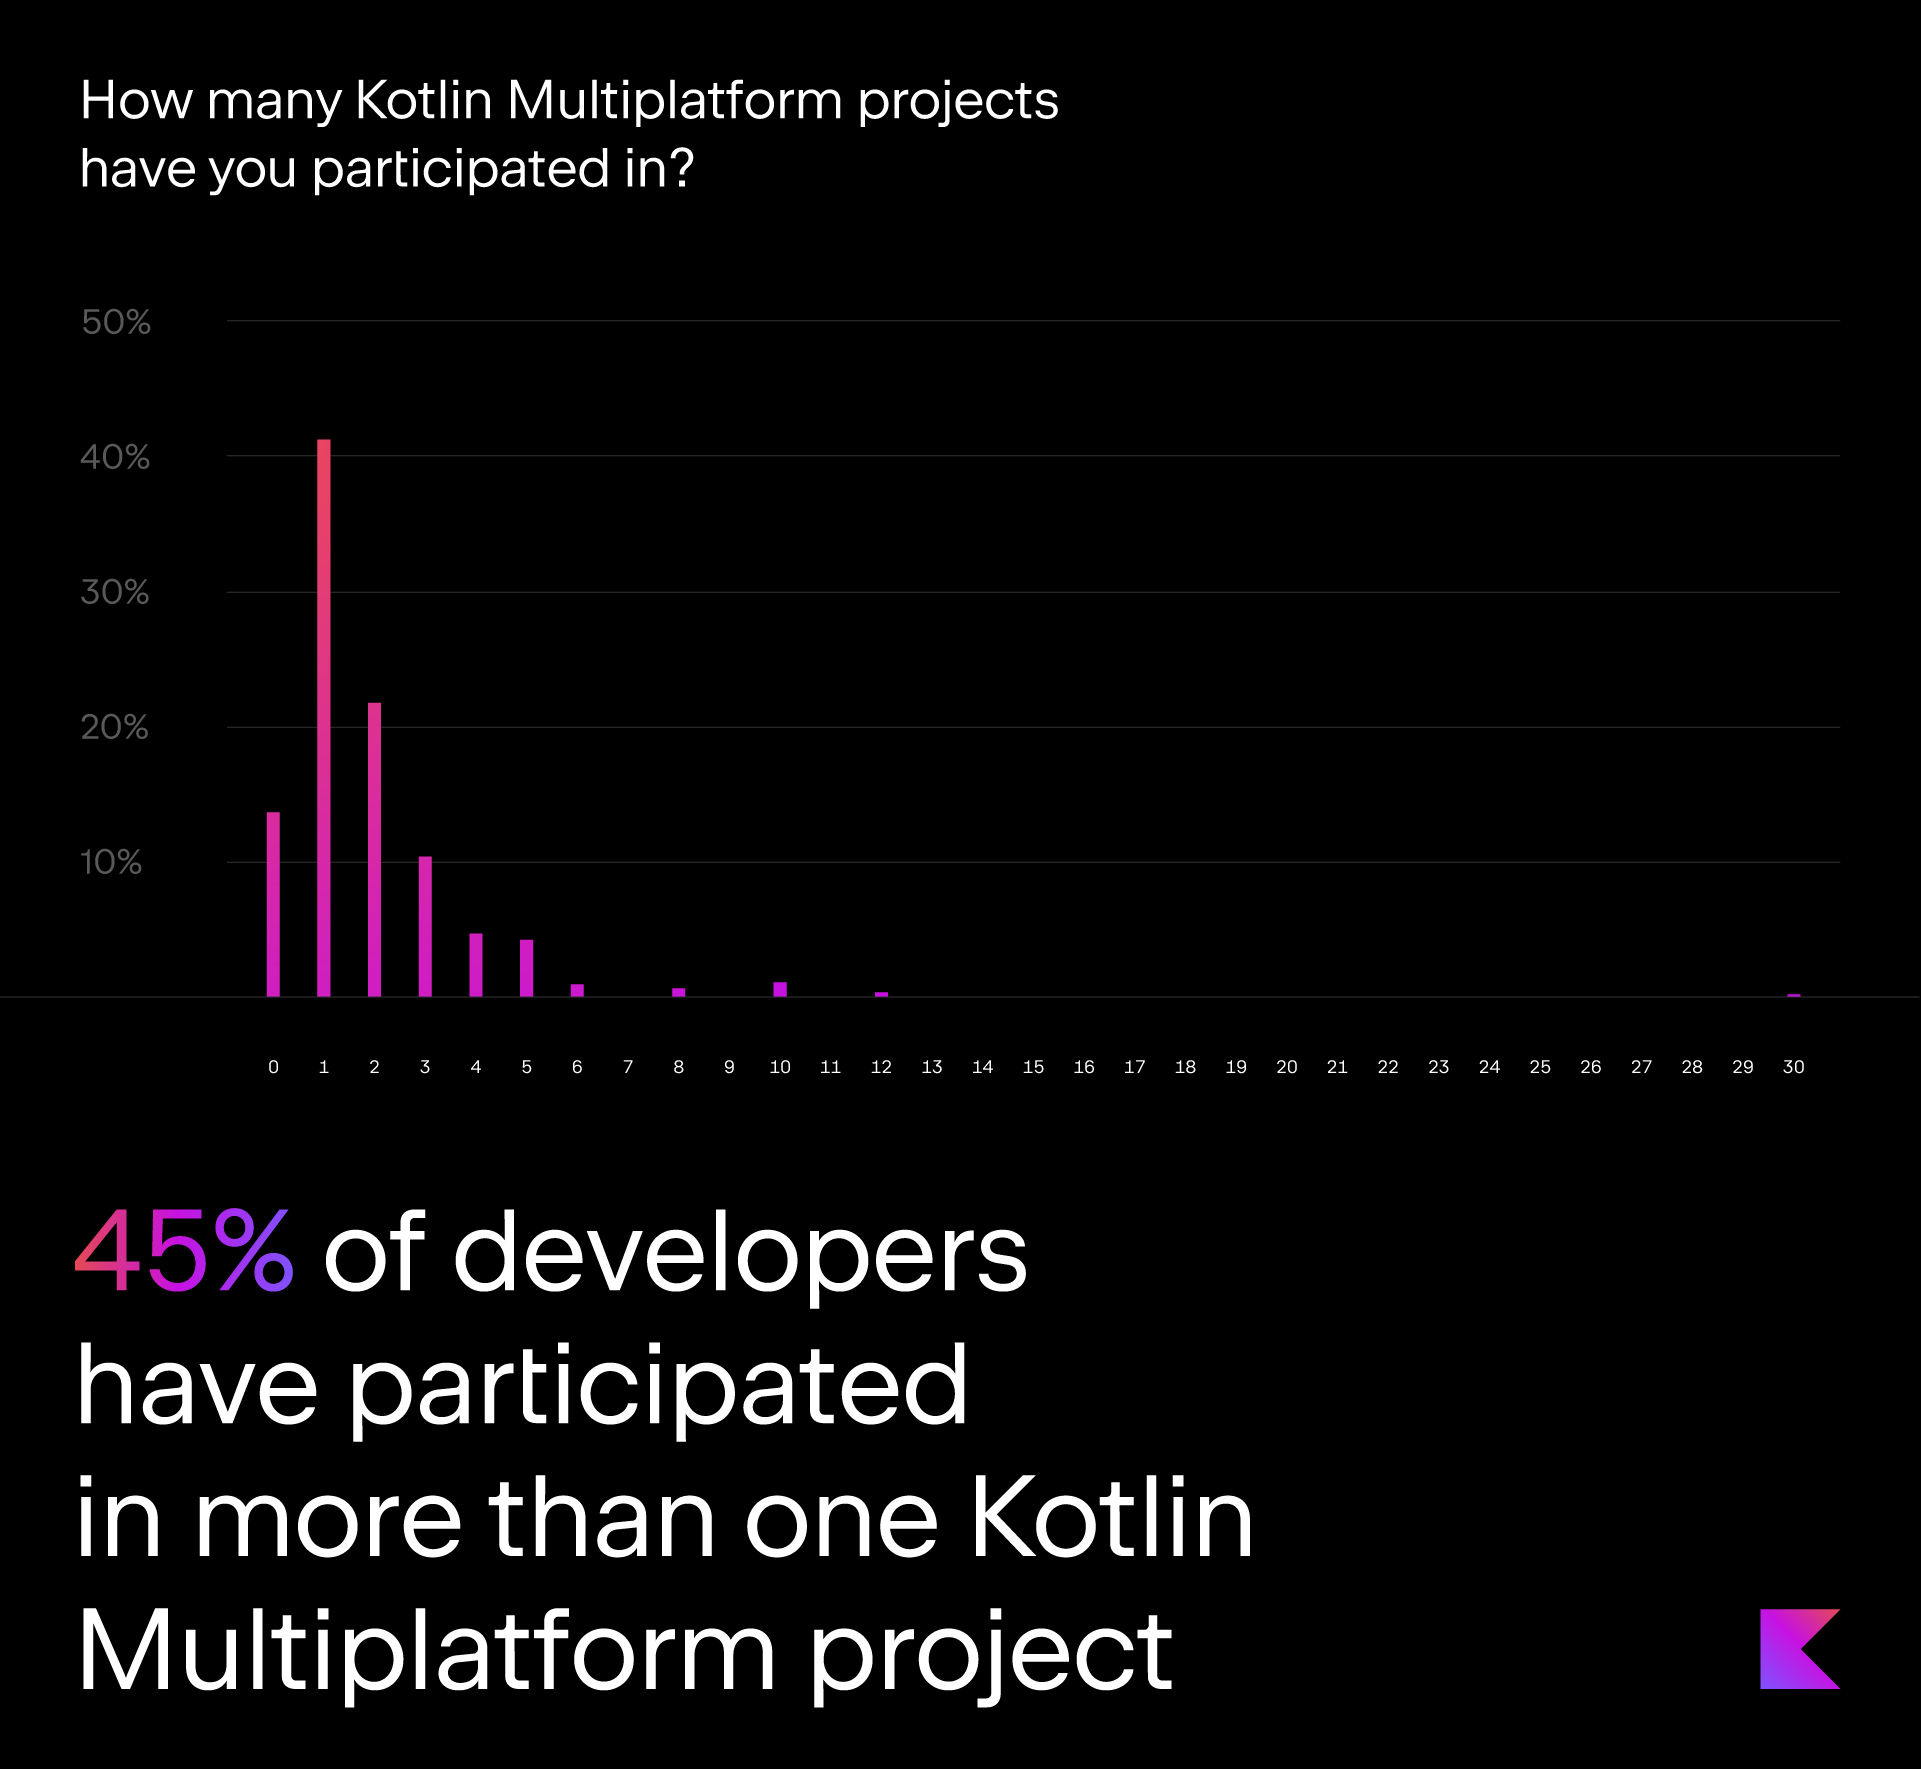 45% of developers have participated in more than one Kotlin Multiplatform project